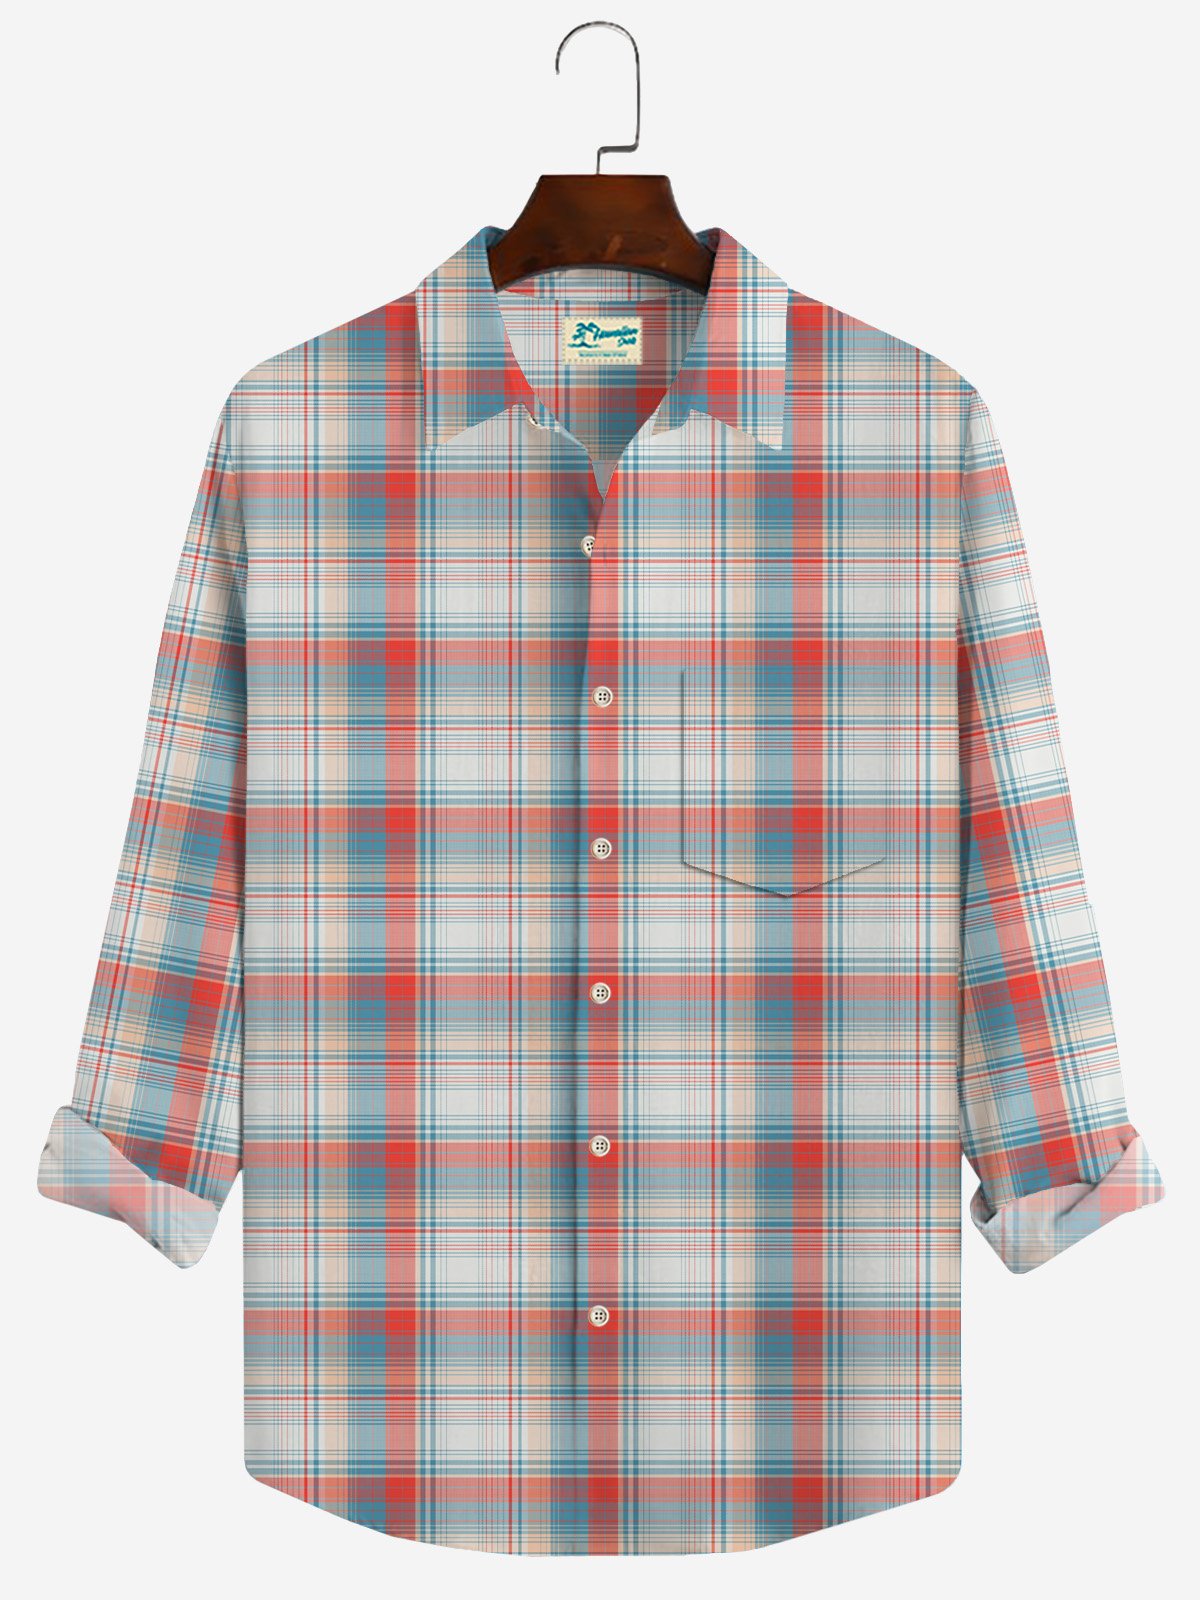 JoyMitty Vacation Casual Red Men's Seersucker Plaid Long Sleeve Shirts Wrinkle-Free Stretch Large Size Camp Pocket Shirts